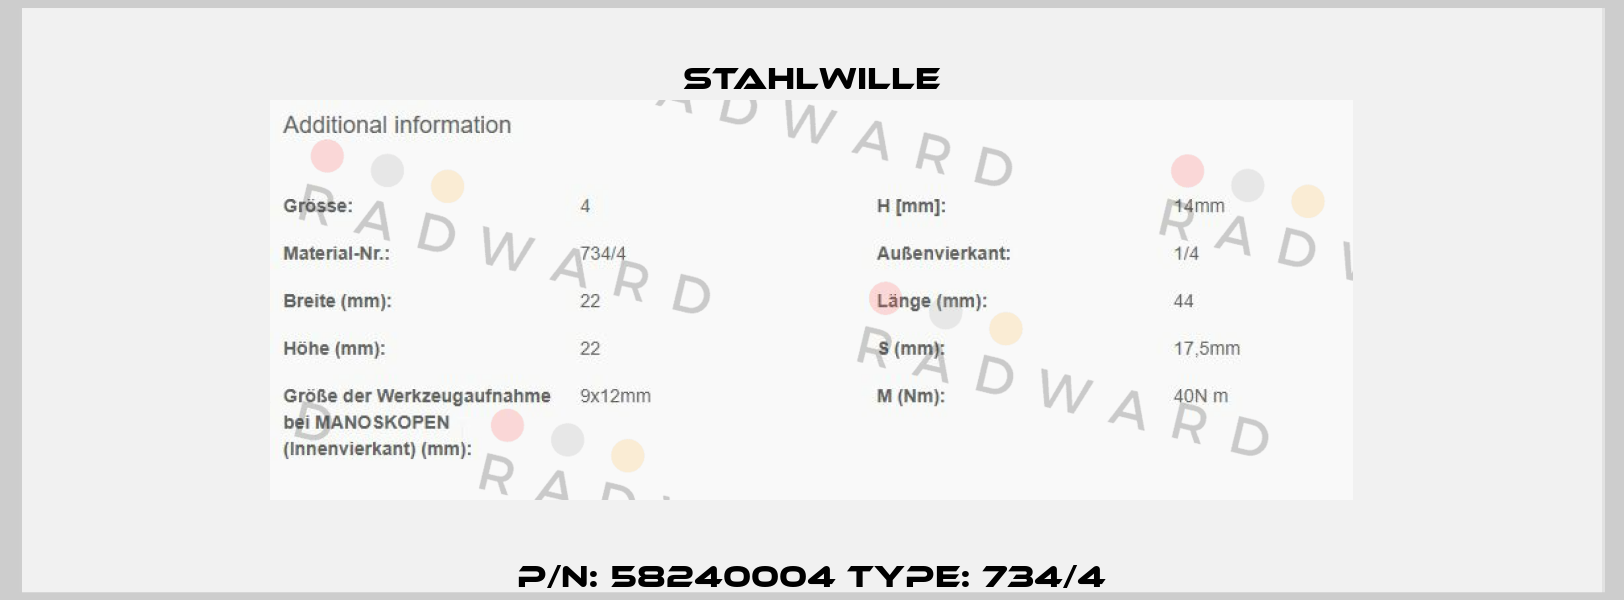 P/N: 58240004 Type: 734/4 Stahlwille